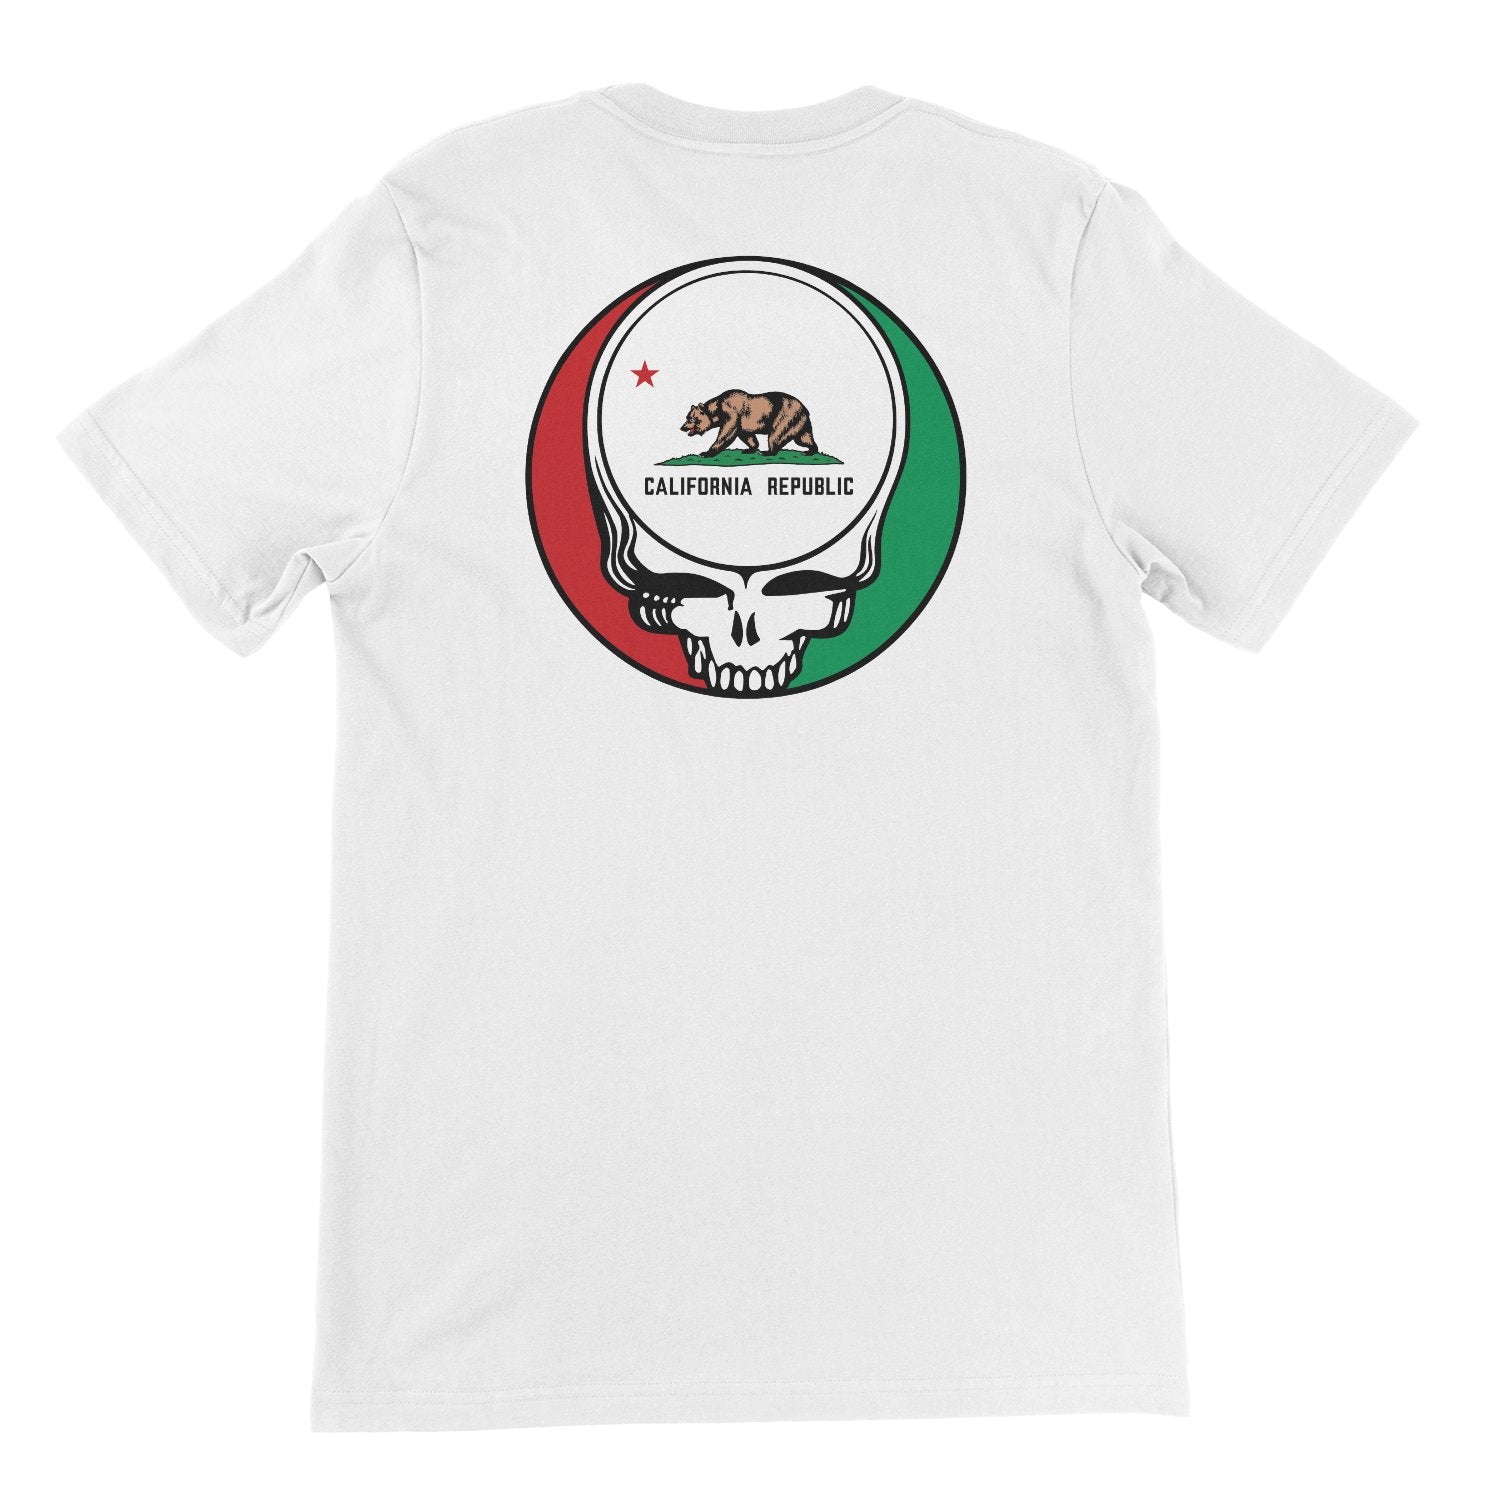 Grateful Dead x TGR California Steal Your State Tee